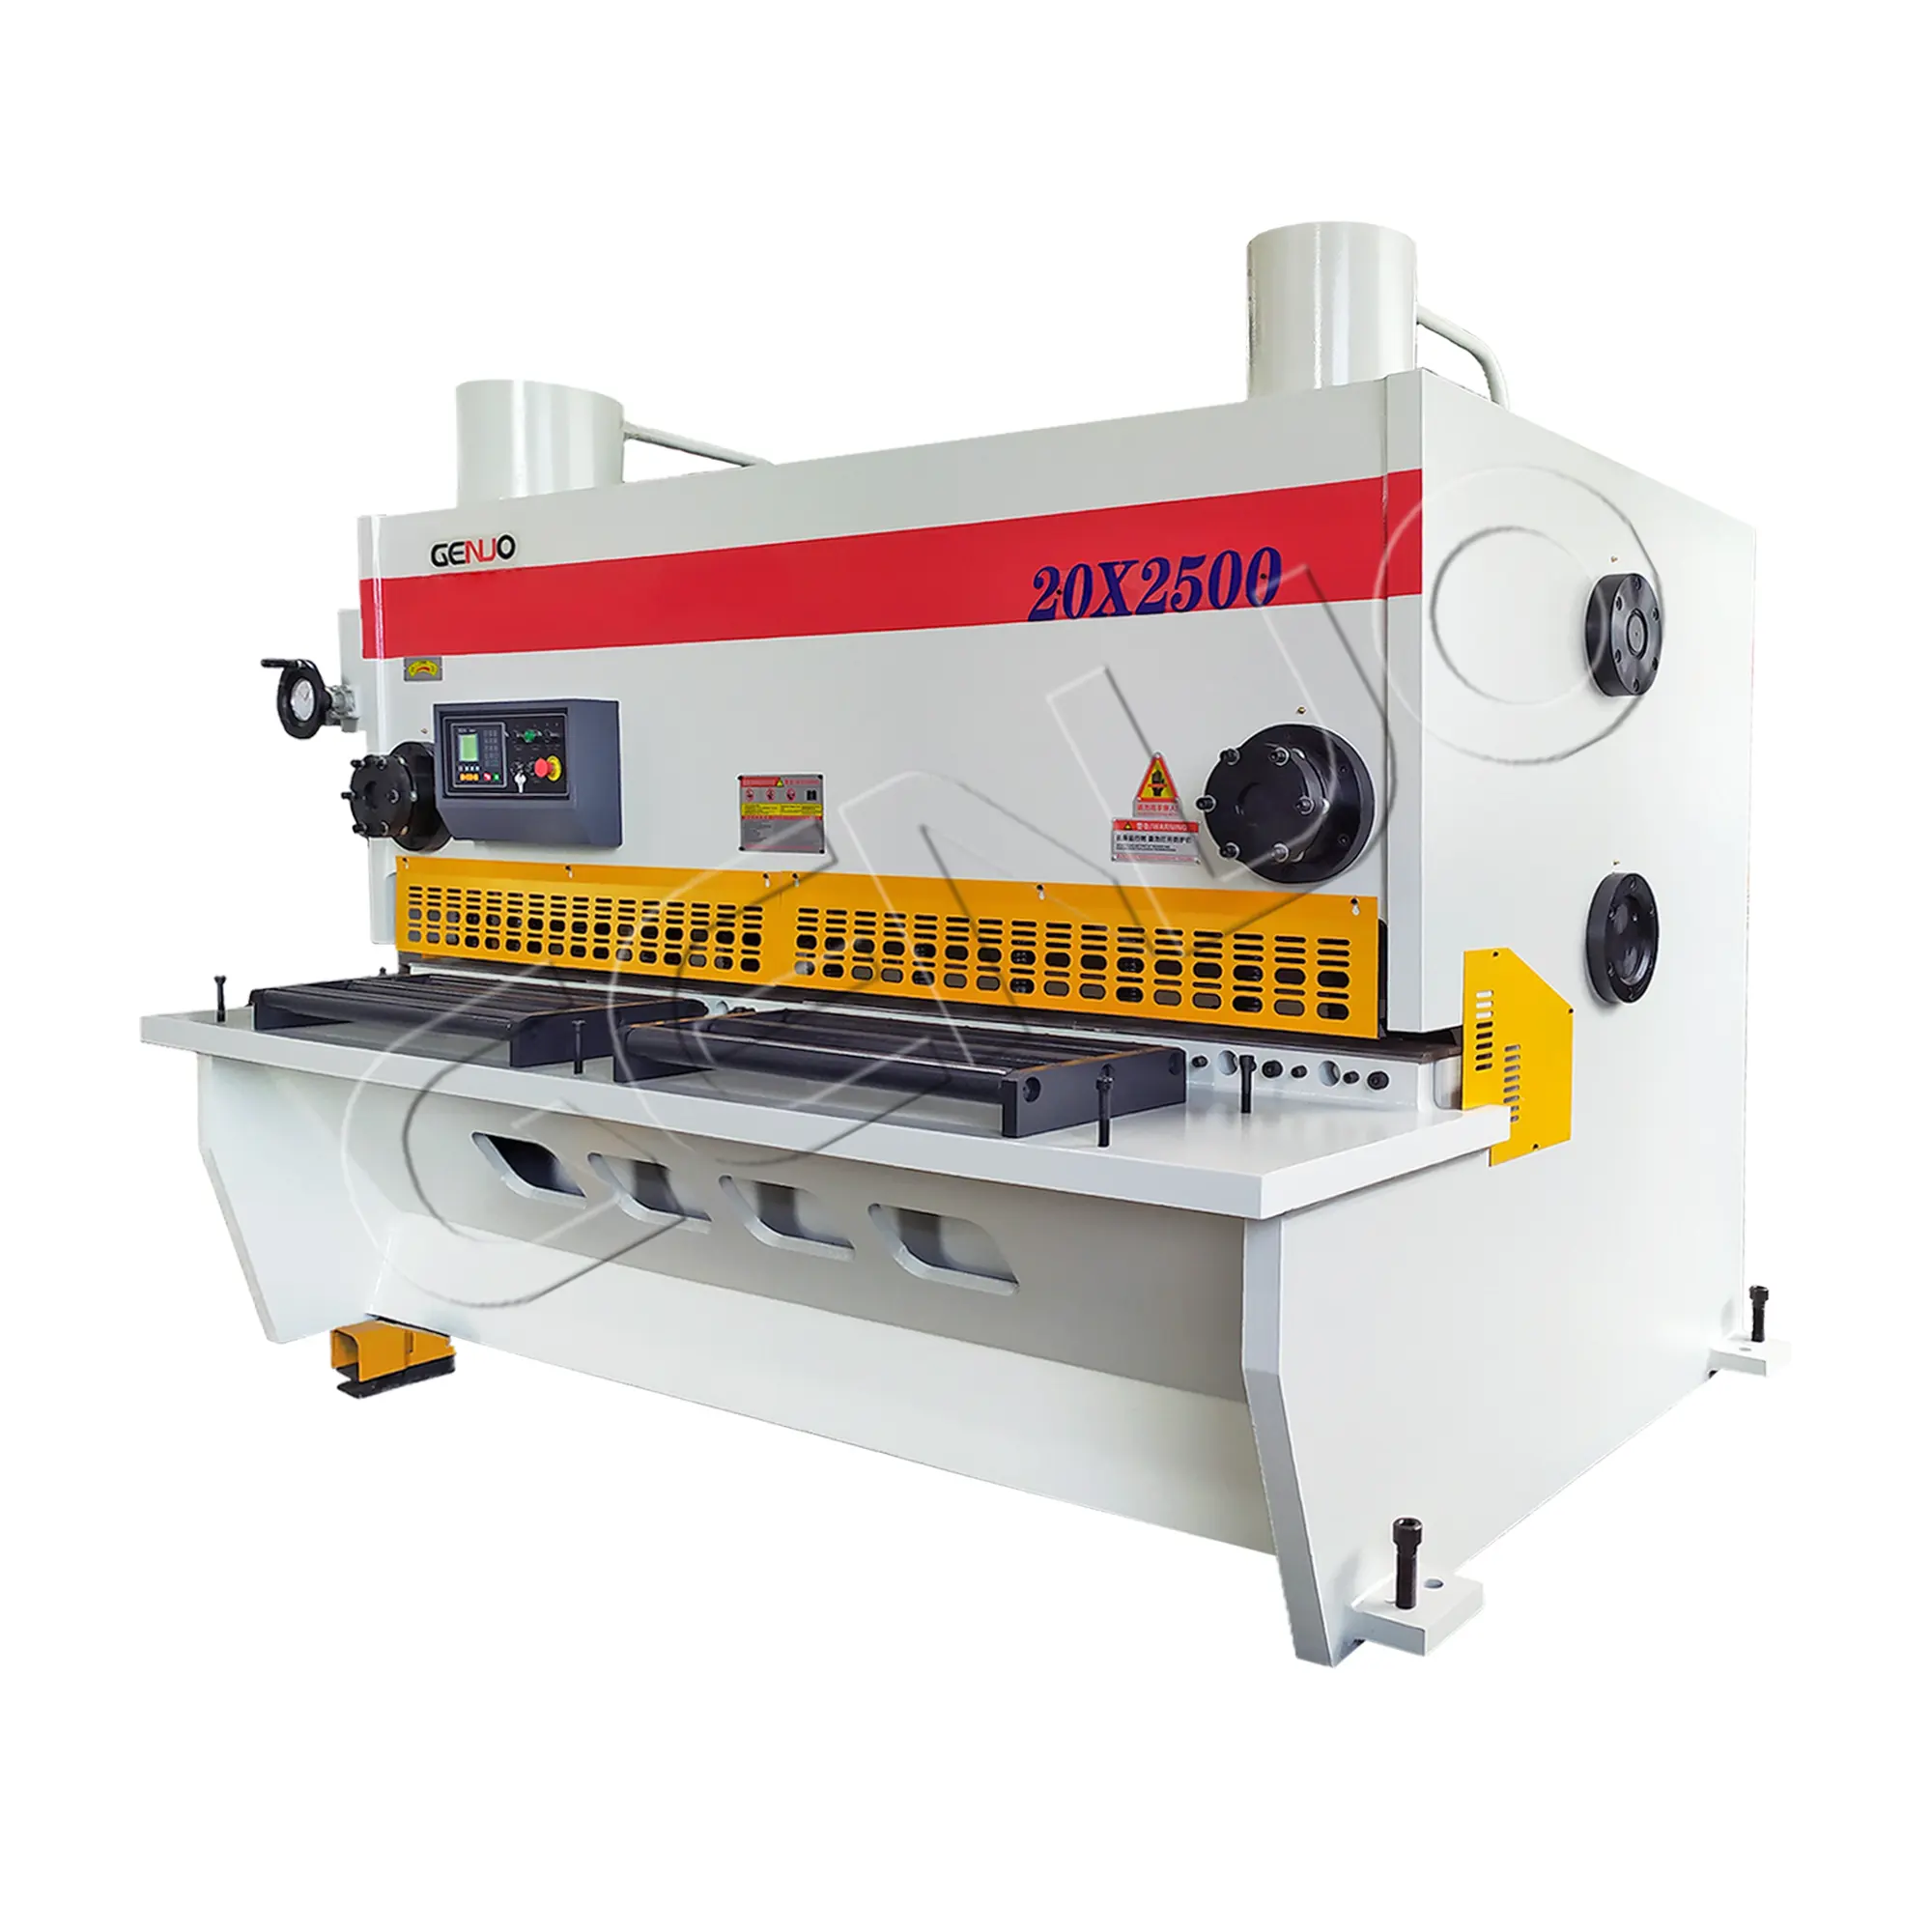 10mm Hydraulic Guillotine Shearing Machine 3000mm cnc Steel Plate Cutting and Shear for Metal Sheet